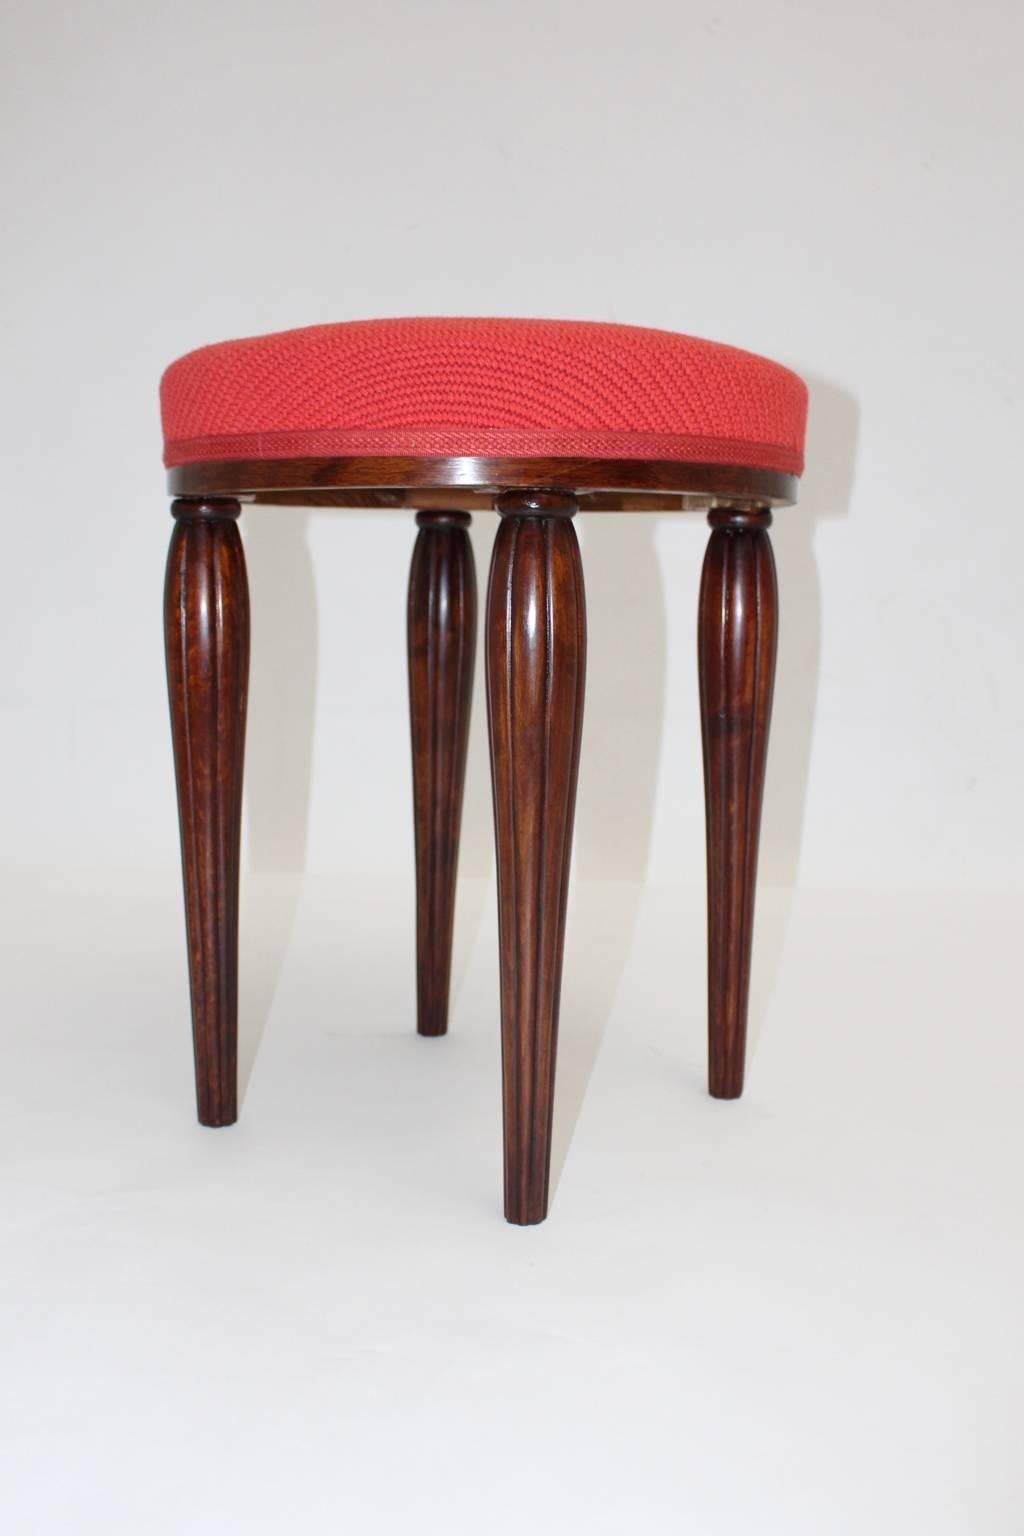 Red Stool or ottoman Vienna Secession attributed to Otto Prutscher Austria circa 1914.
The stool has grooved walnut feet and taper downwards.
The seat is newly covered with a high-quality textile fabric, carefully cleaned and polished by hand.
So